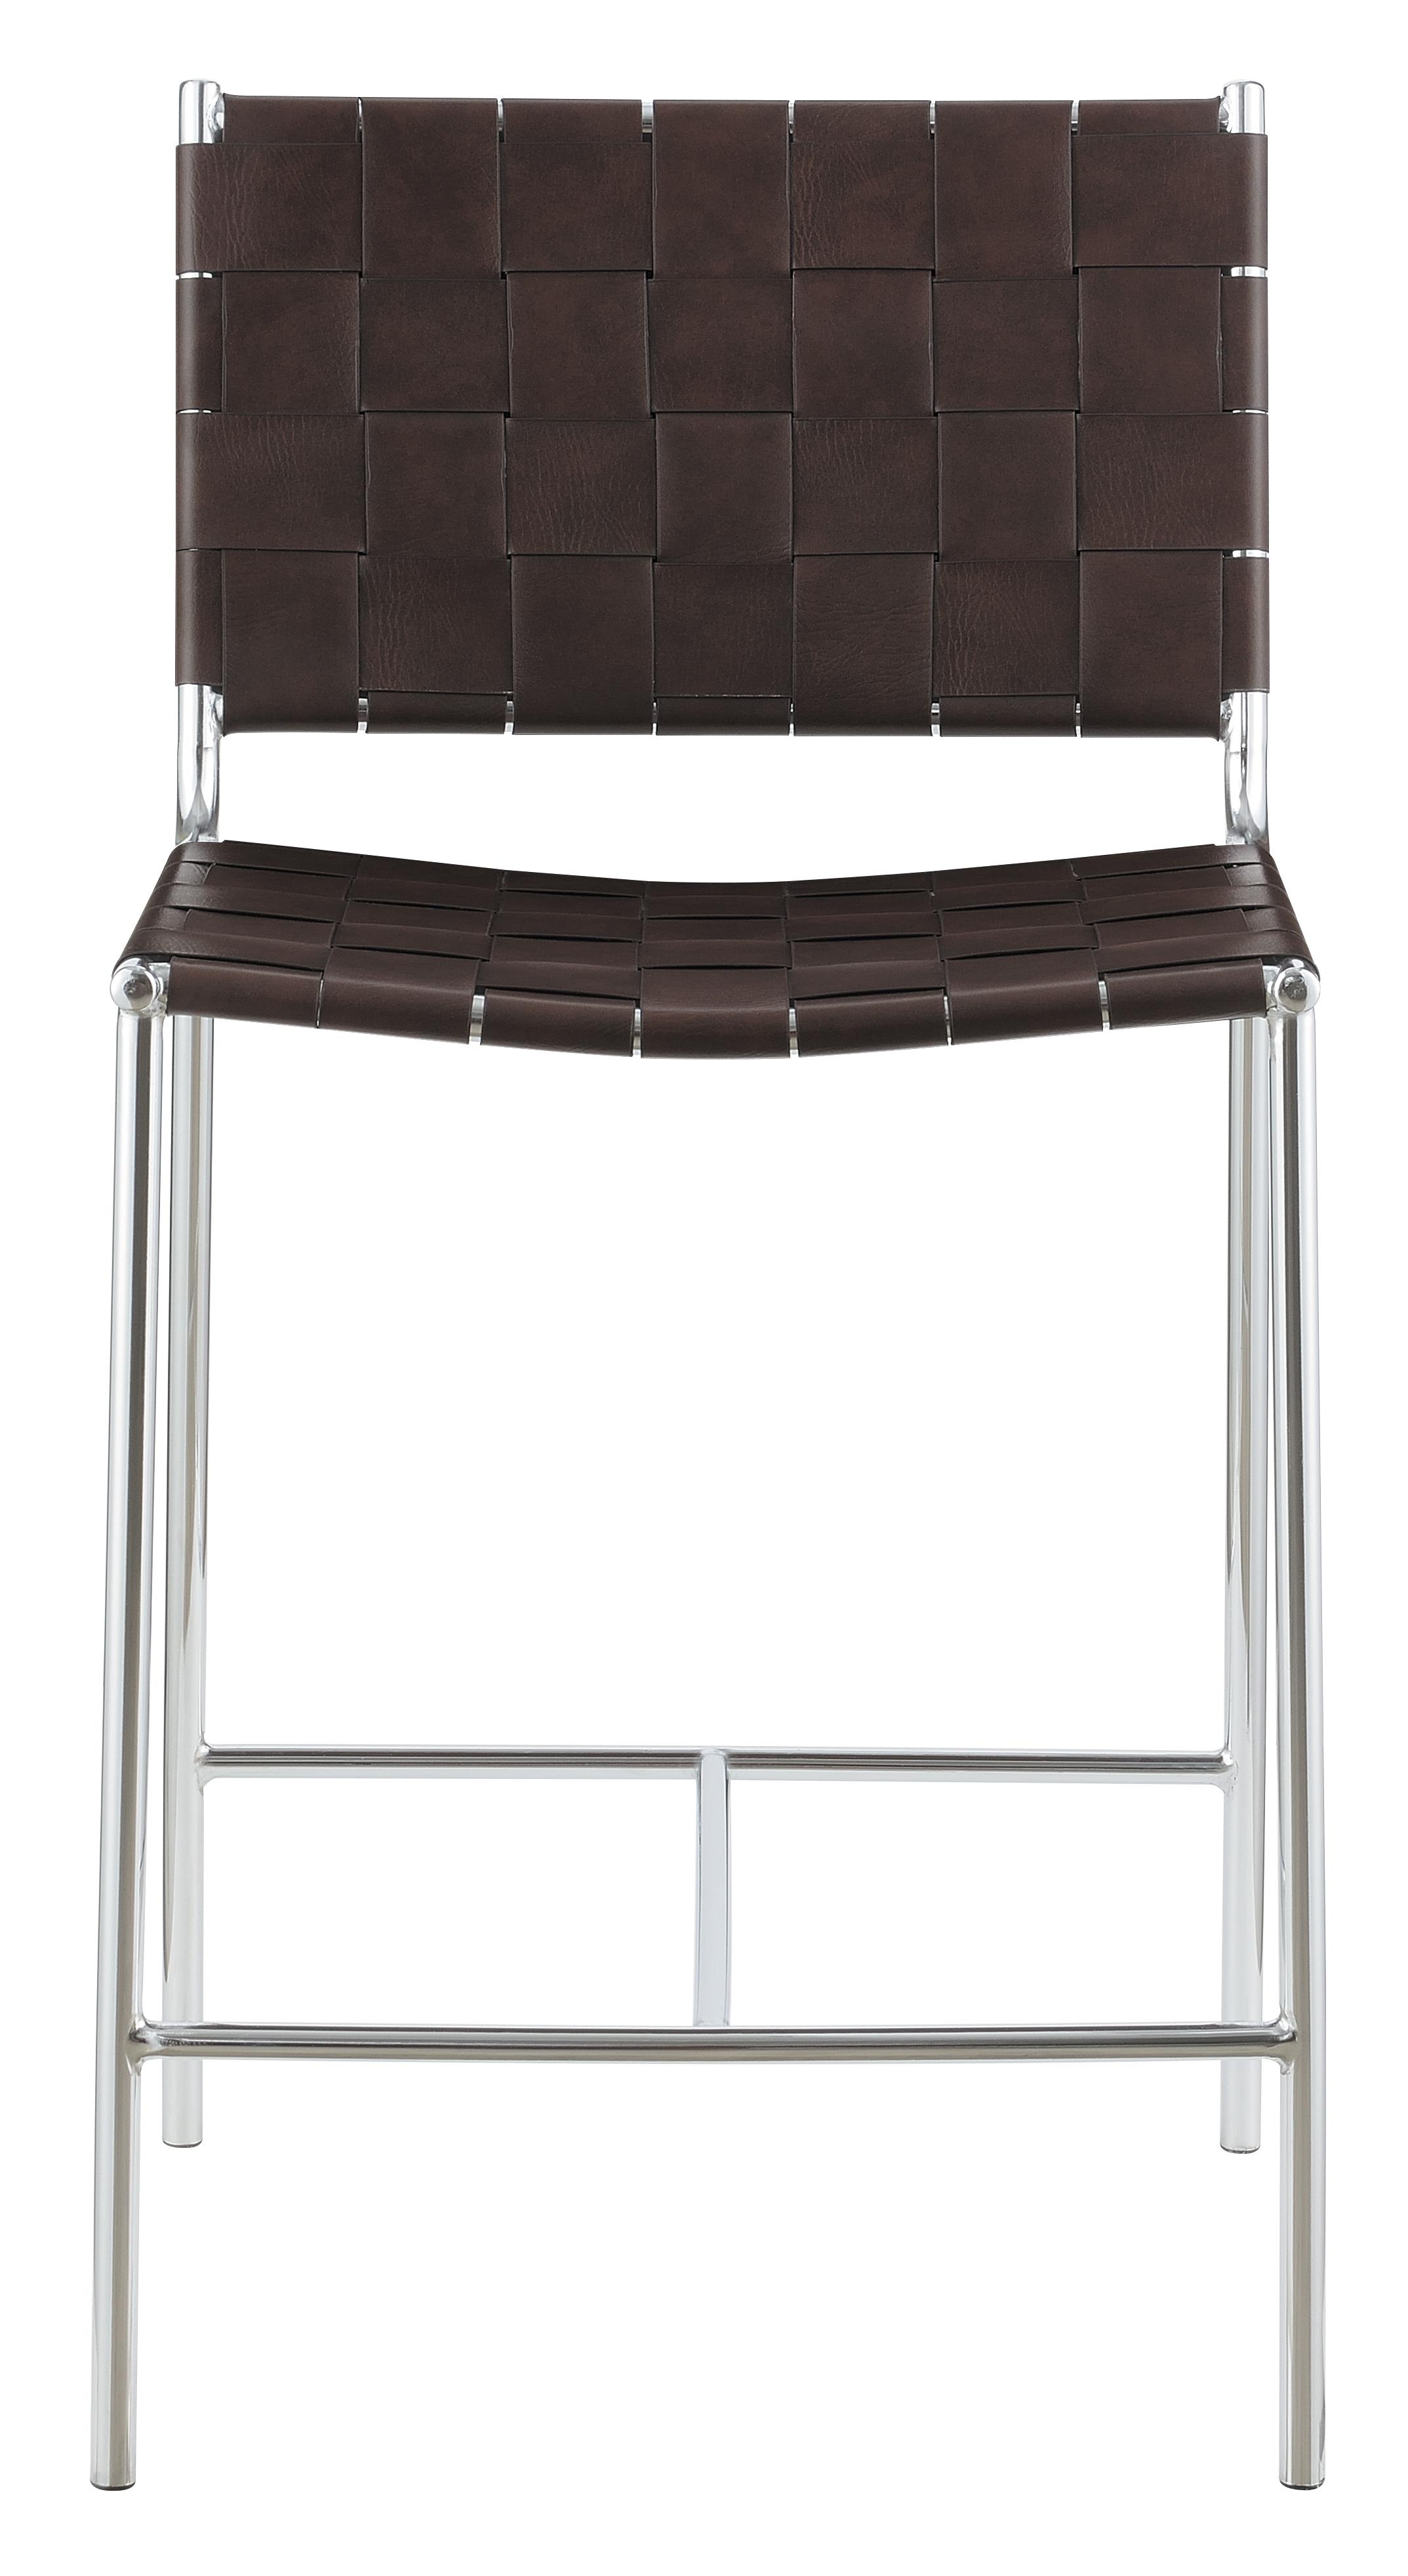 Contemporary Counter Height Stool 183583 183583 in Brown PVC